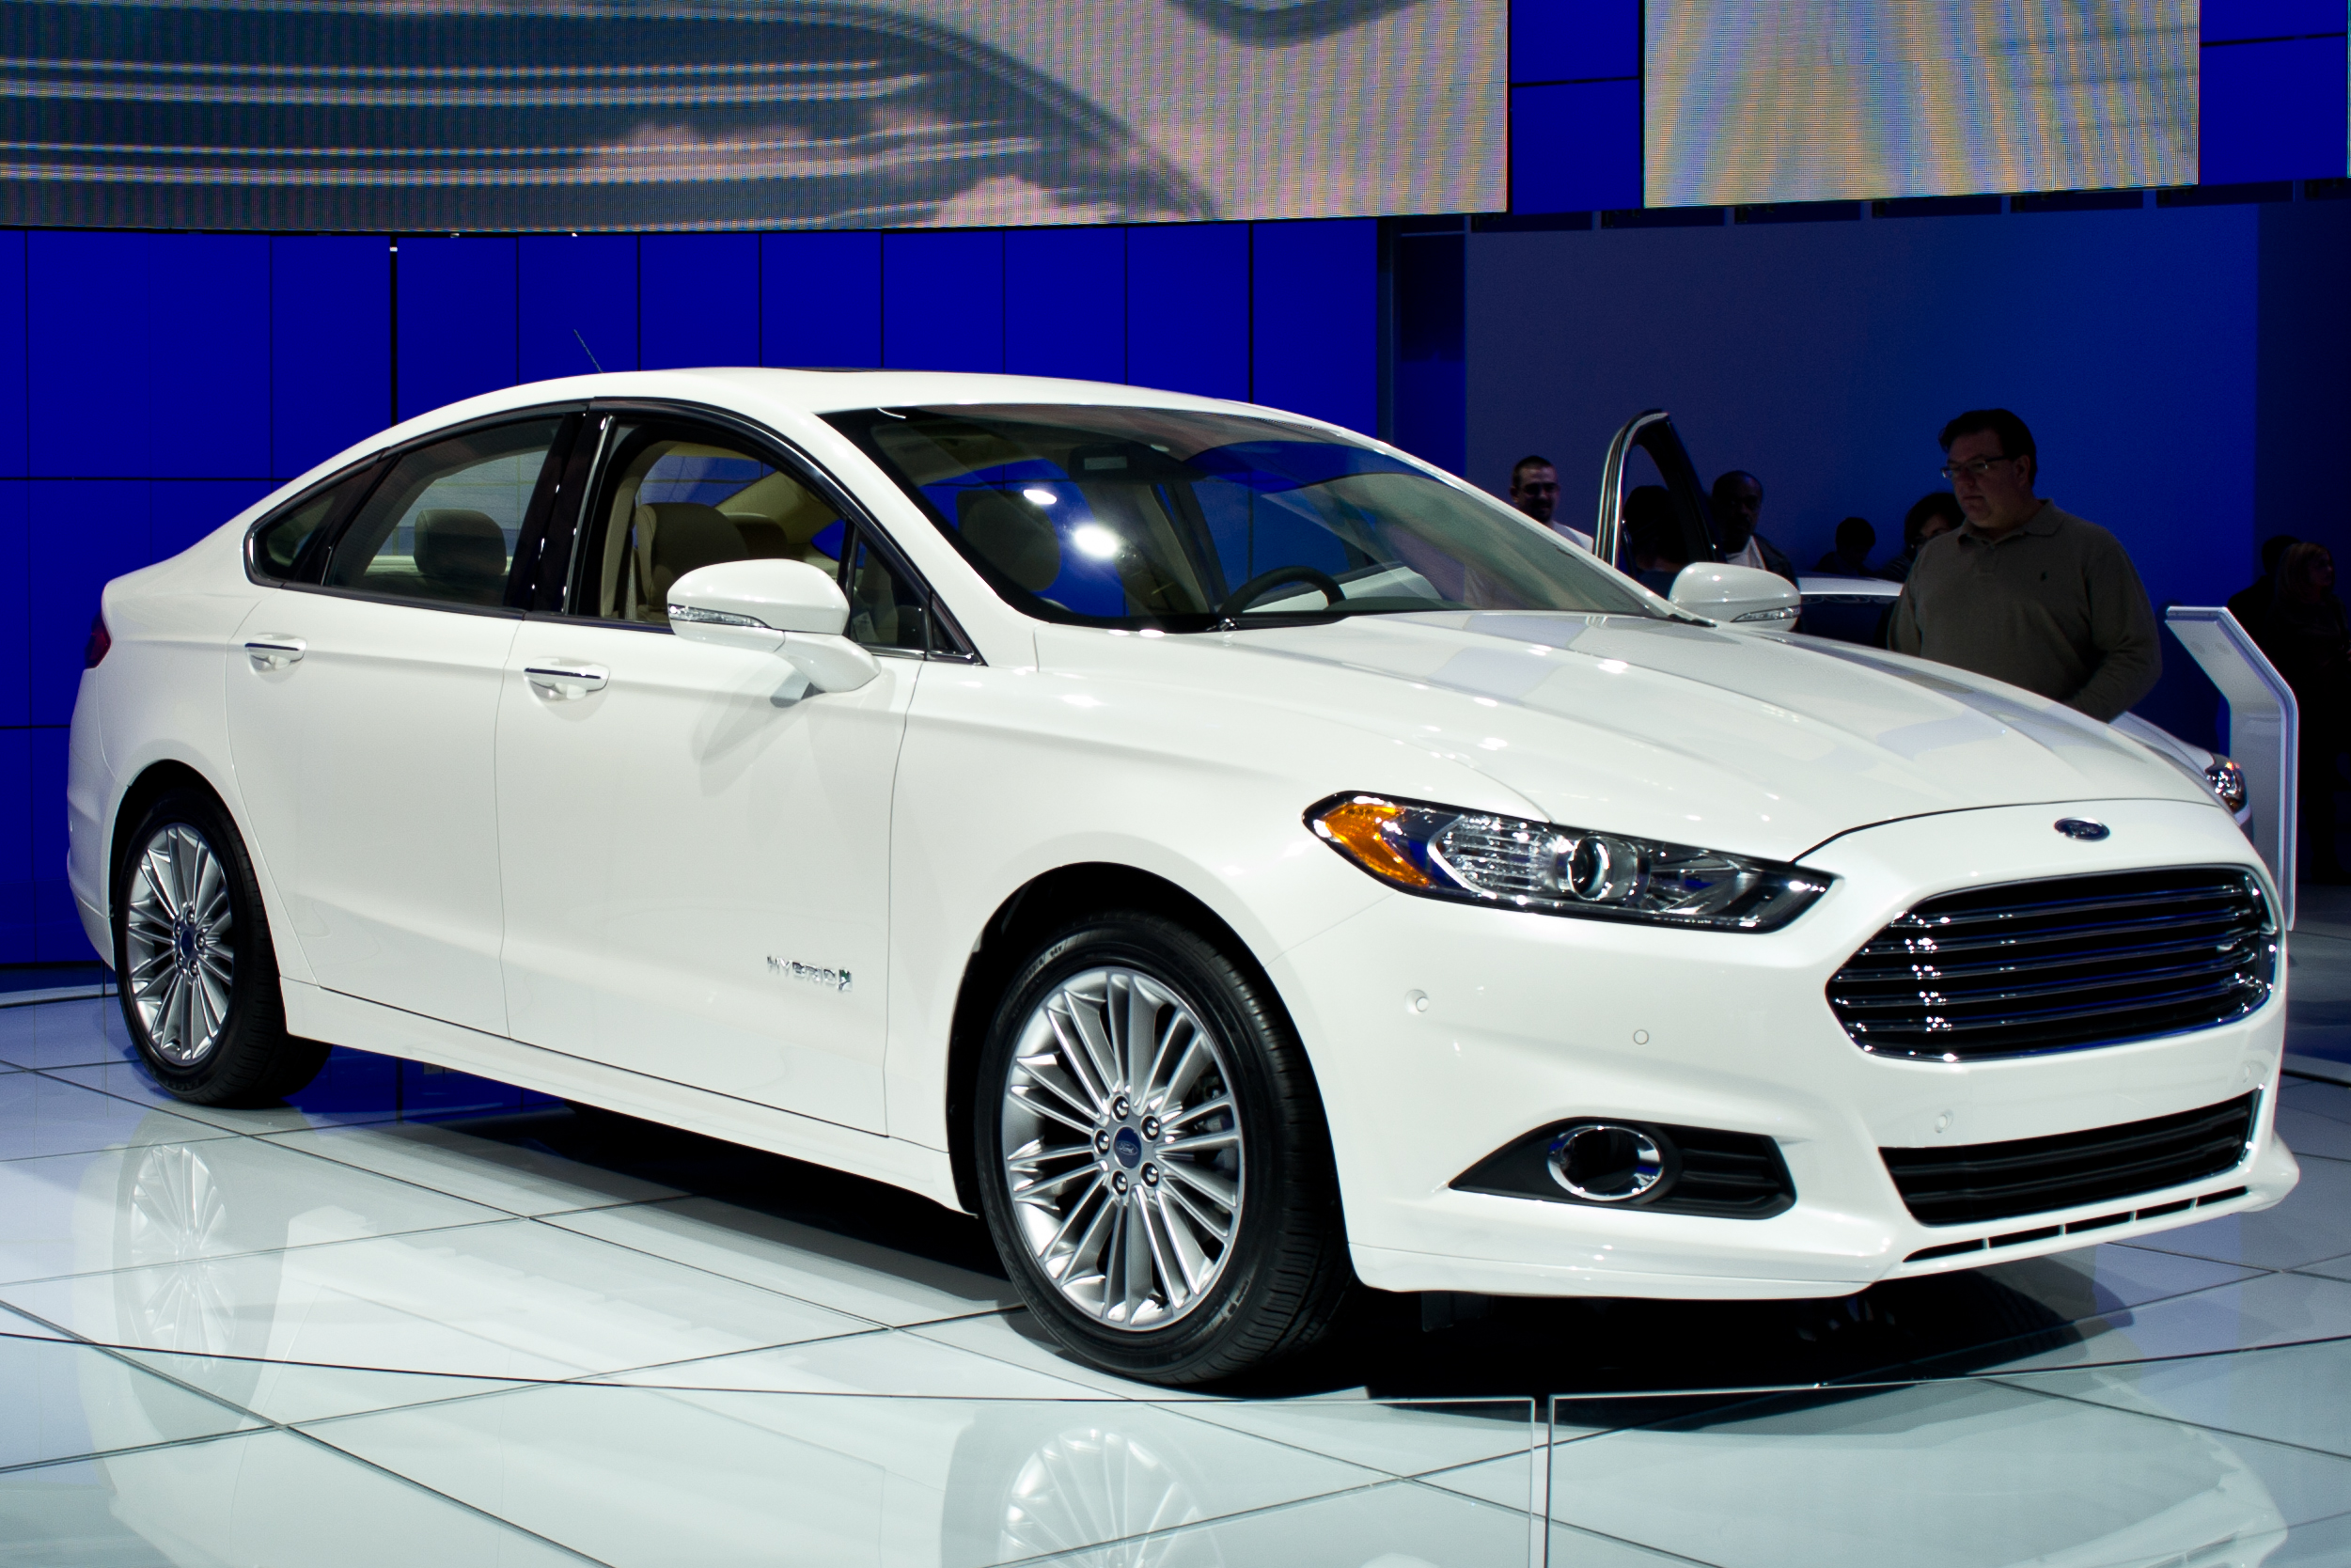 File:Ford Fusion Hybrid 2nd gen.jpg - Wikimedia Commons